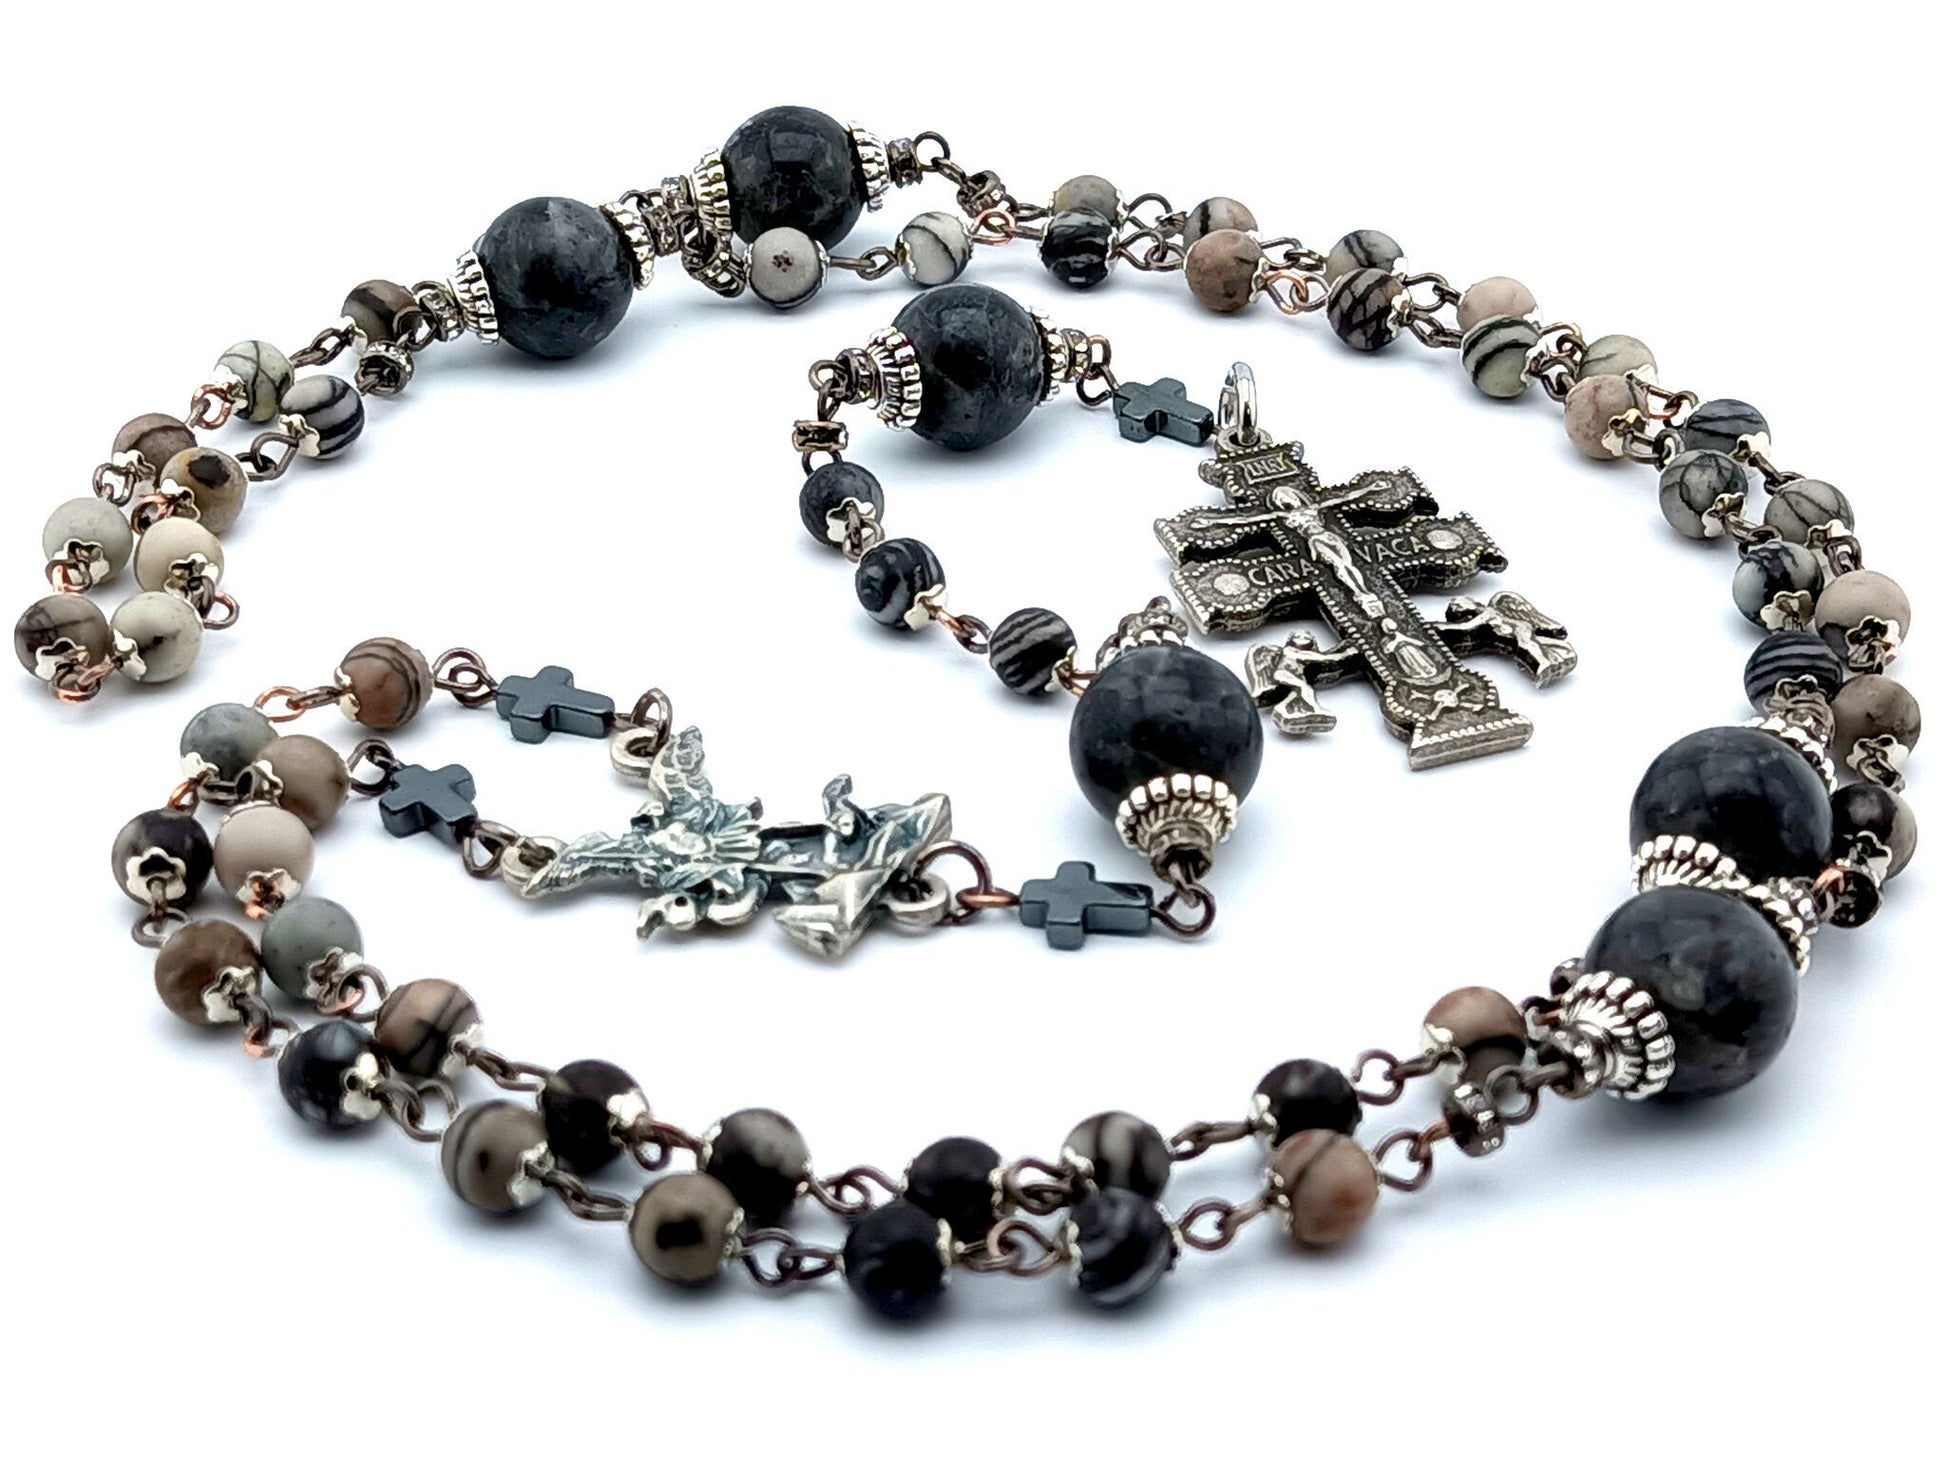 Saint Michael unique rosary beads with labradorite gemstone beads, Caravaca crucifix, metal centre medal and large veined black jade pater beads.